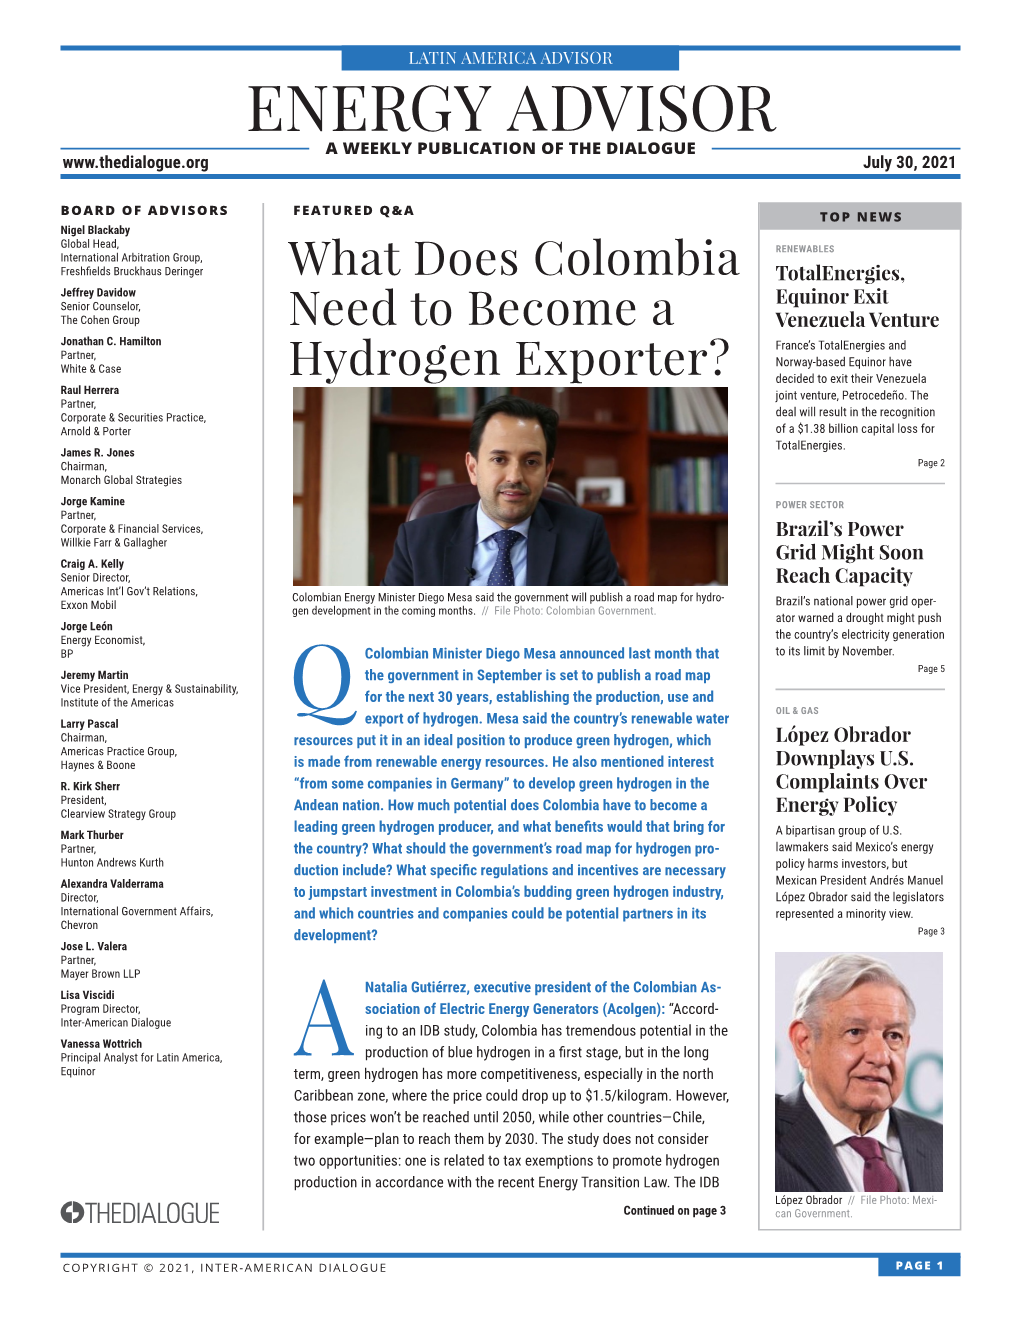 ENERGY ADVISOR a WEEKLY PUBLICATION of the DIALOGUE July 30, 2021